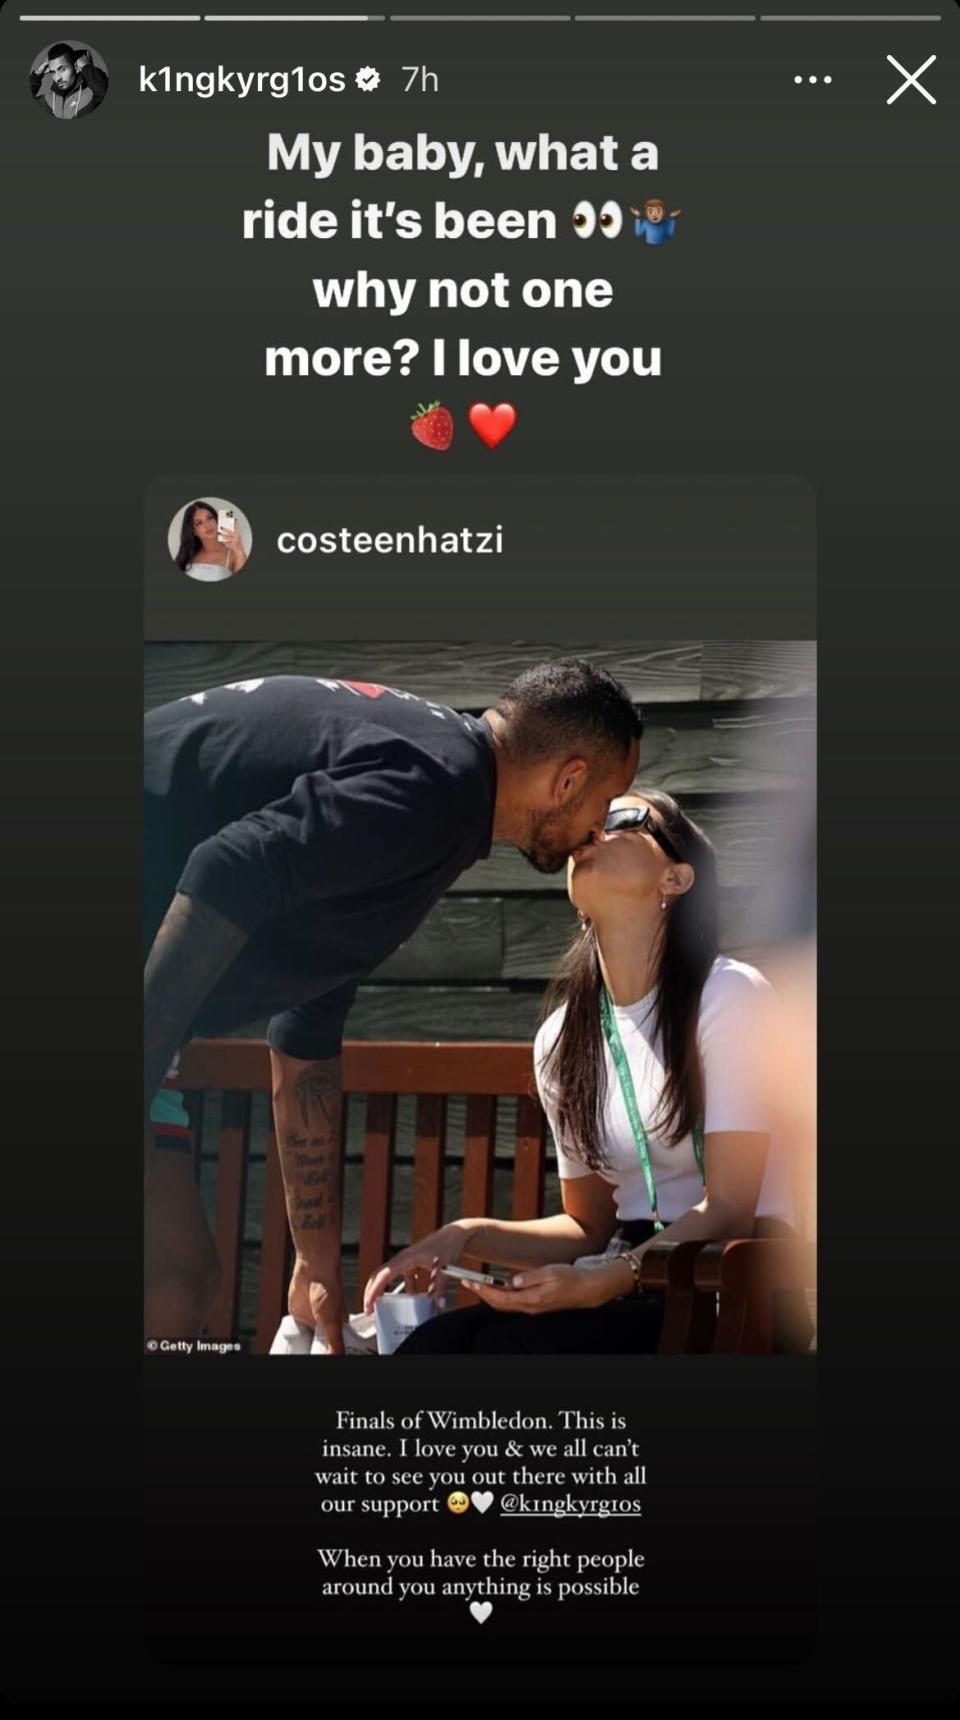 Nick Kyrgios and girlfriend Costeen Hatzi share messages.